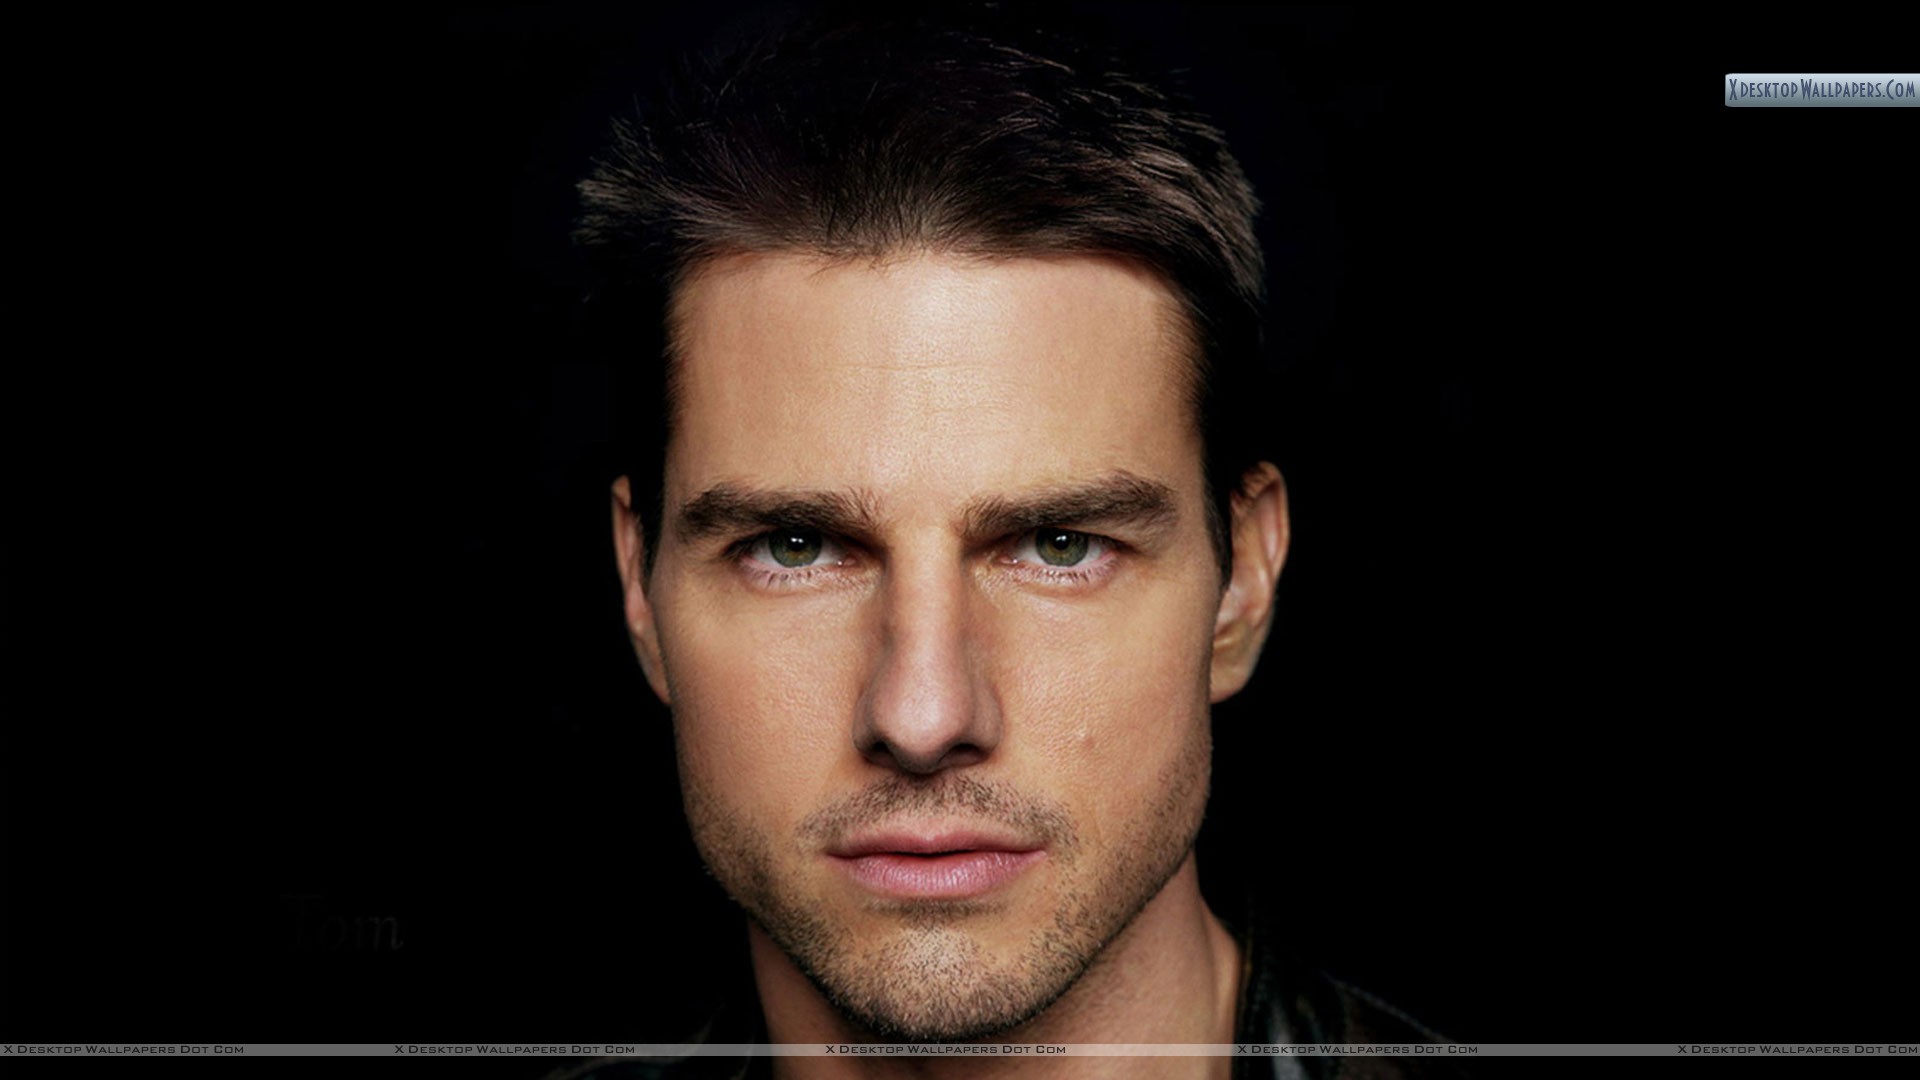 Tom Cruise Wallpaper Photos Image In HD